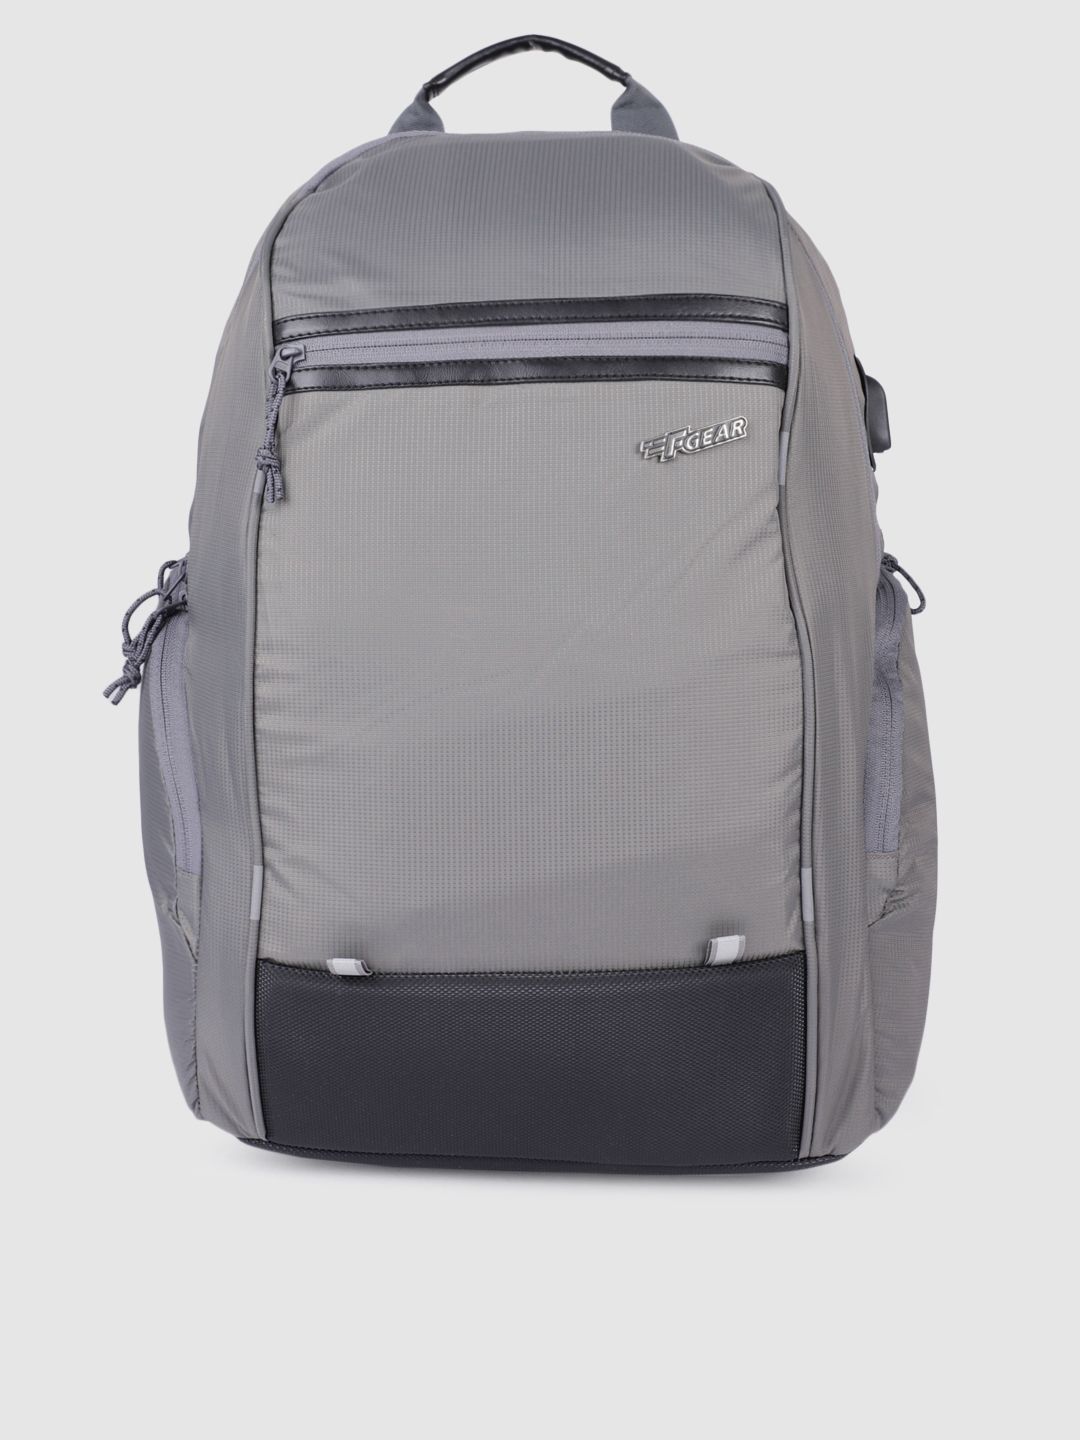 F Gear Unisex Grey Solid Marcus Doby Backpack Price in India